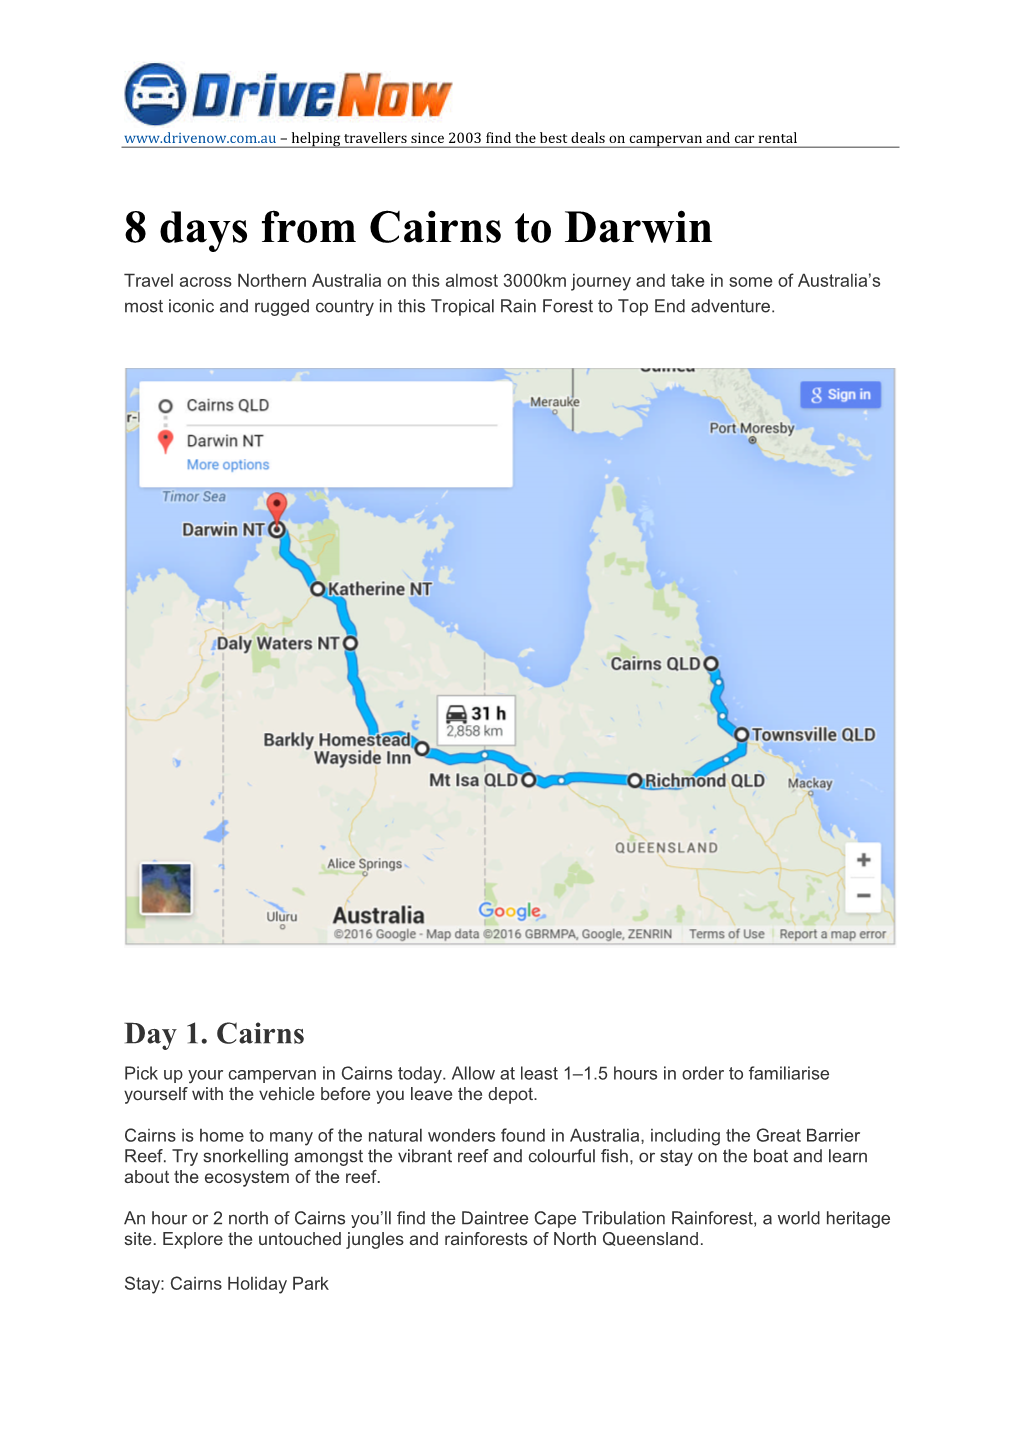 8 Days from Cairns to Darwin